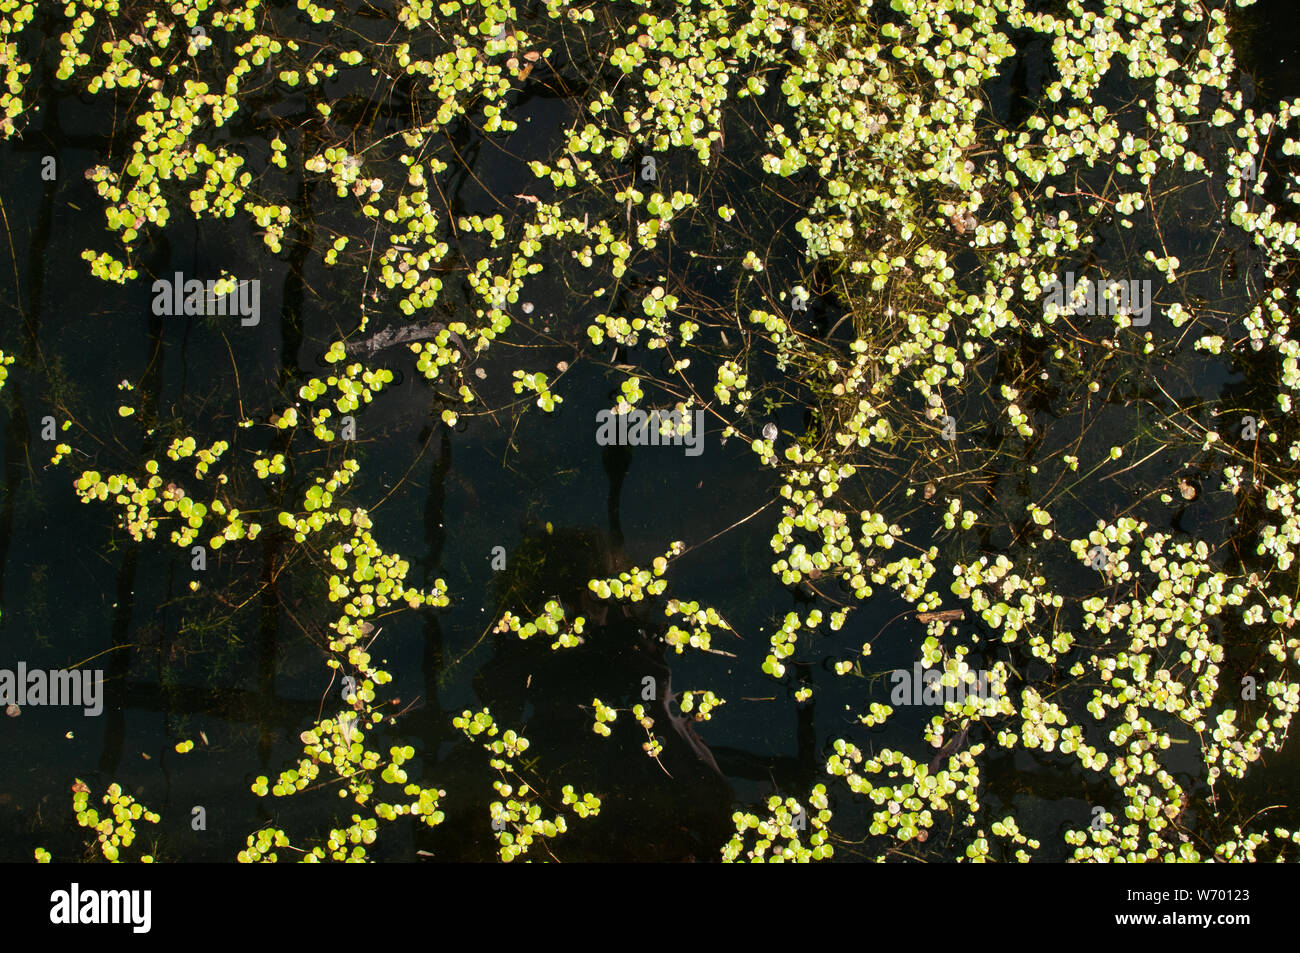 pond weed Stock Photo